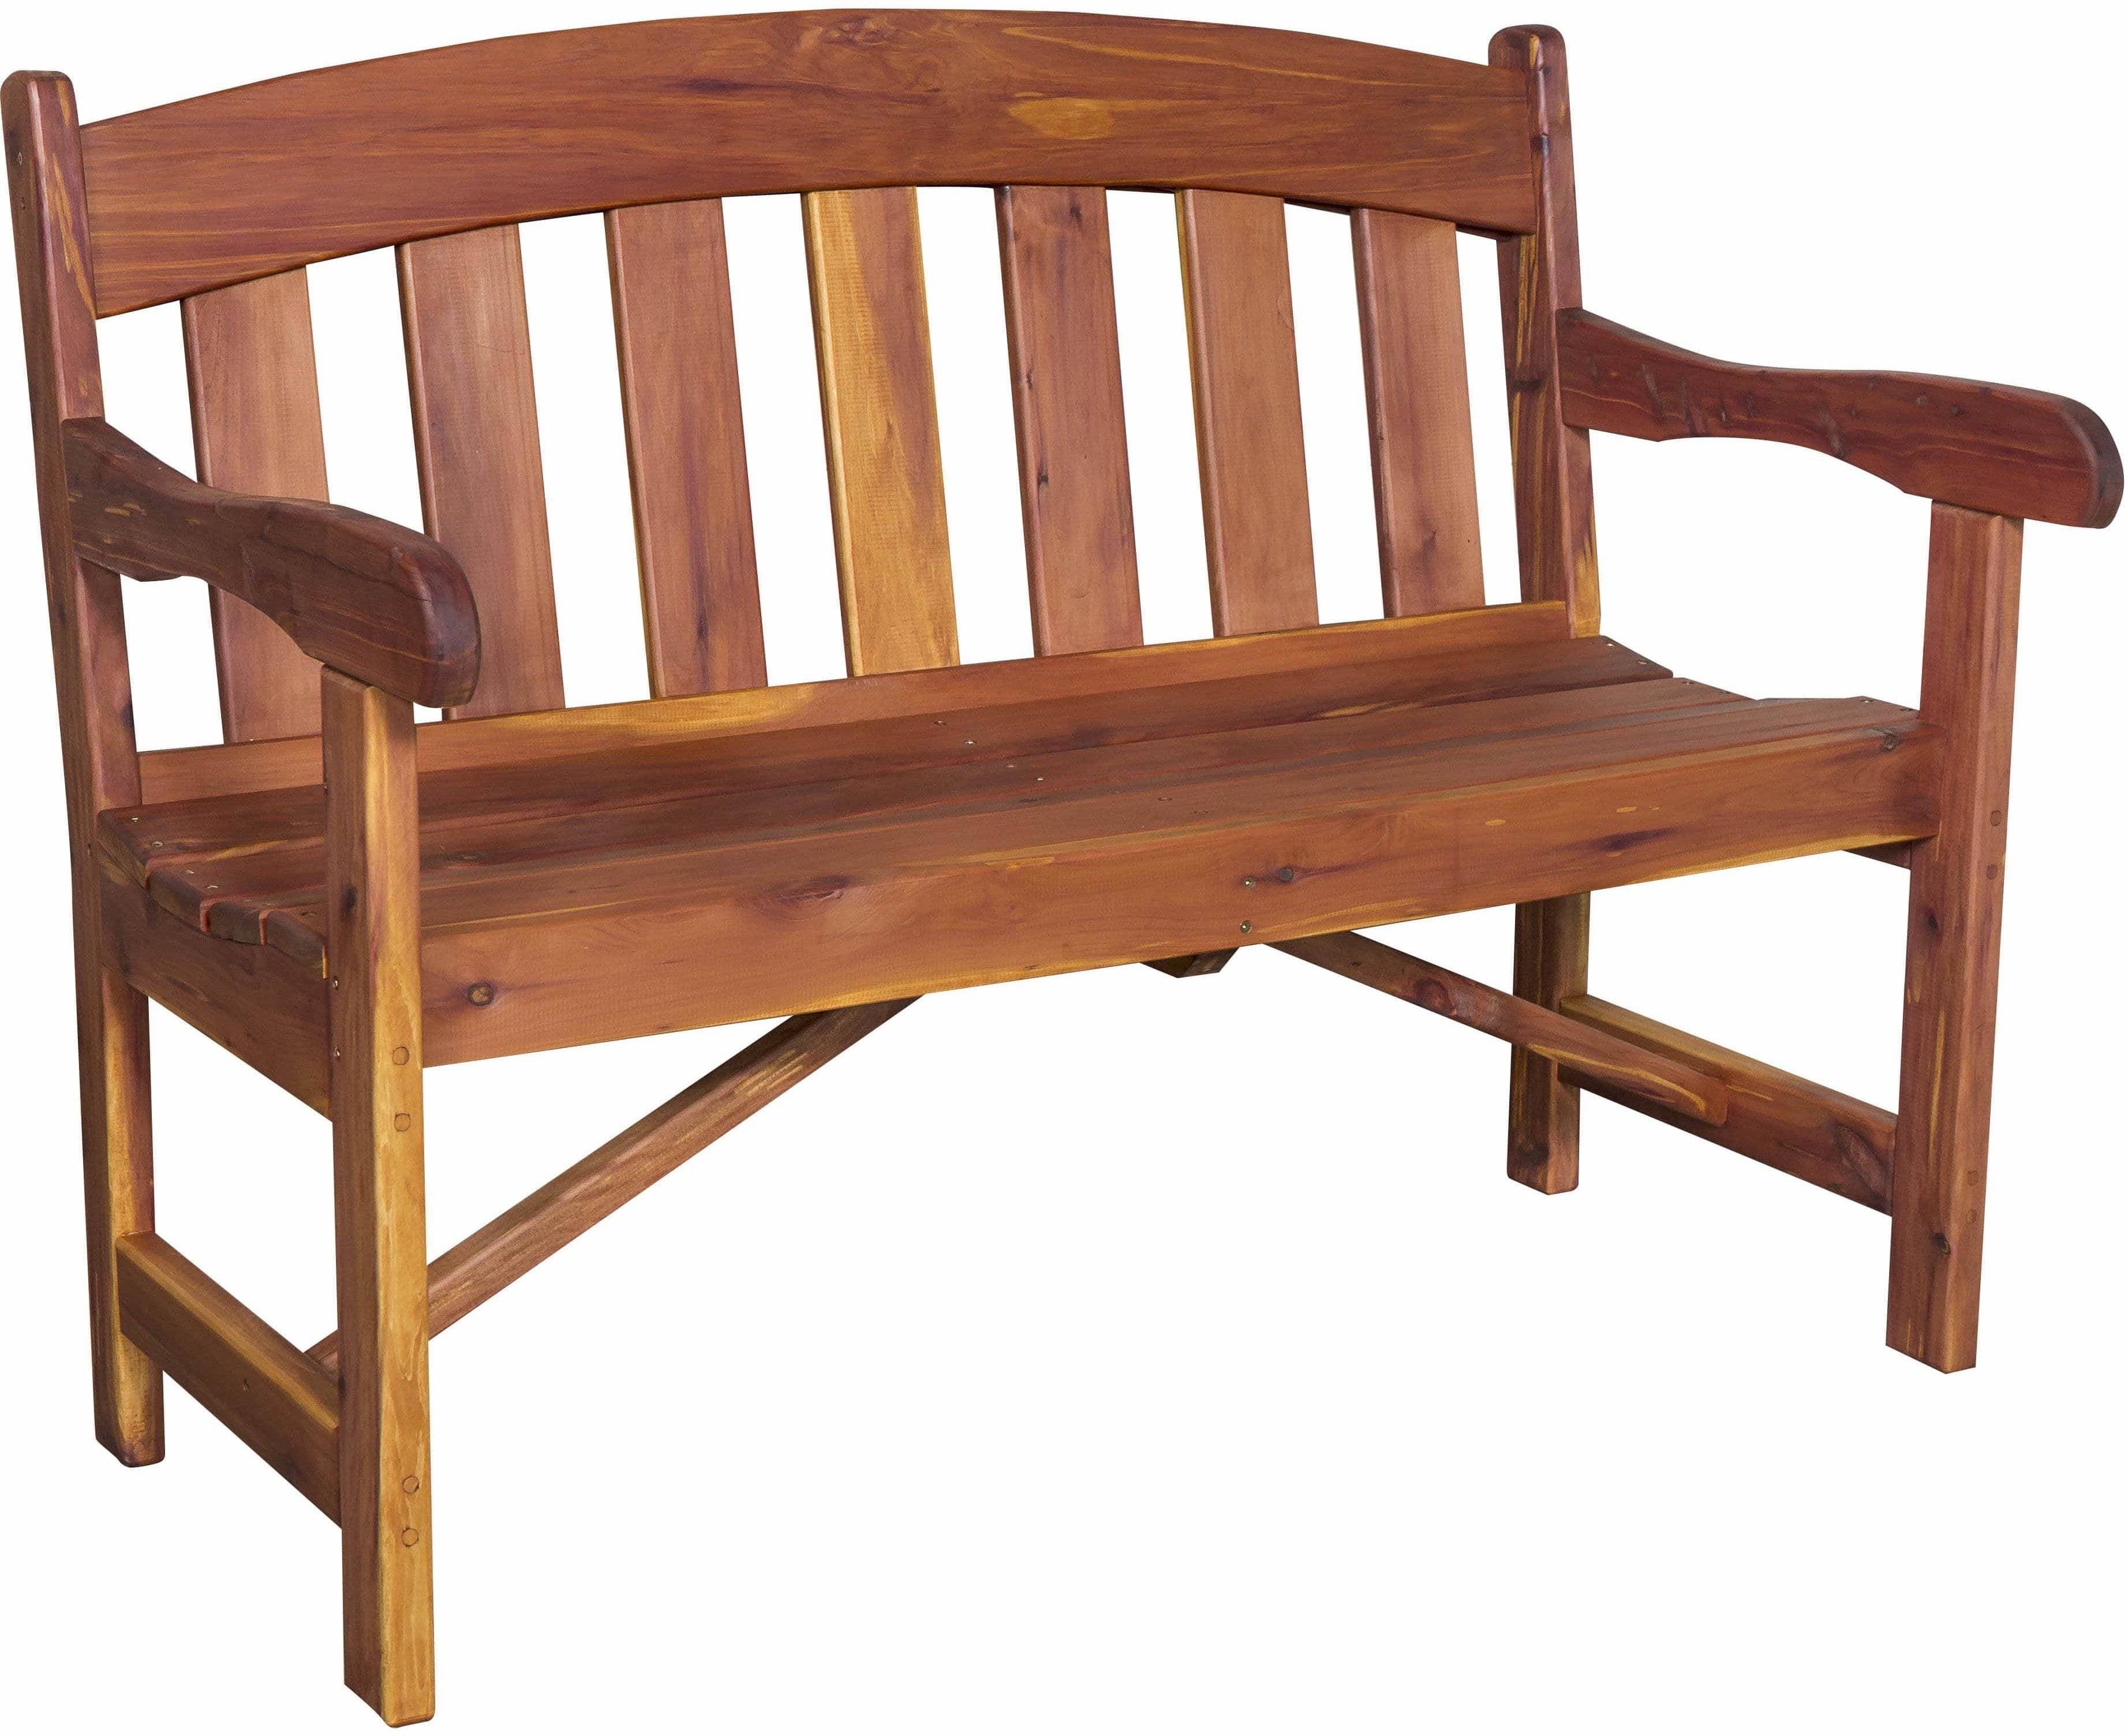 Nature’s Lawn & Patio 48" Garden Bench-Rustic Furniture Marketplace